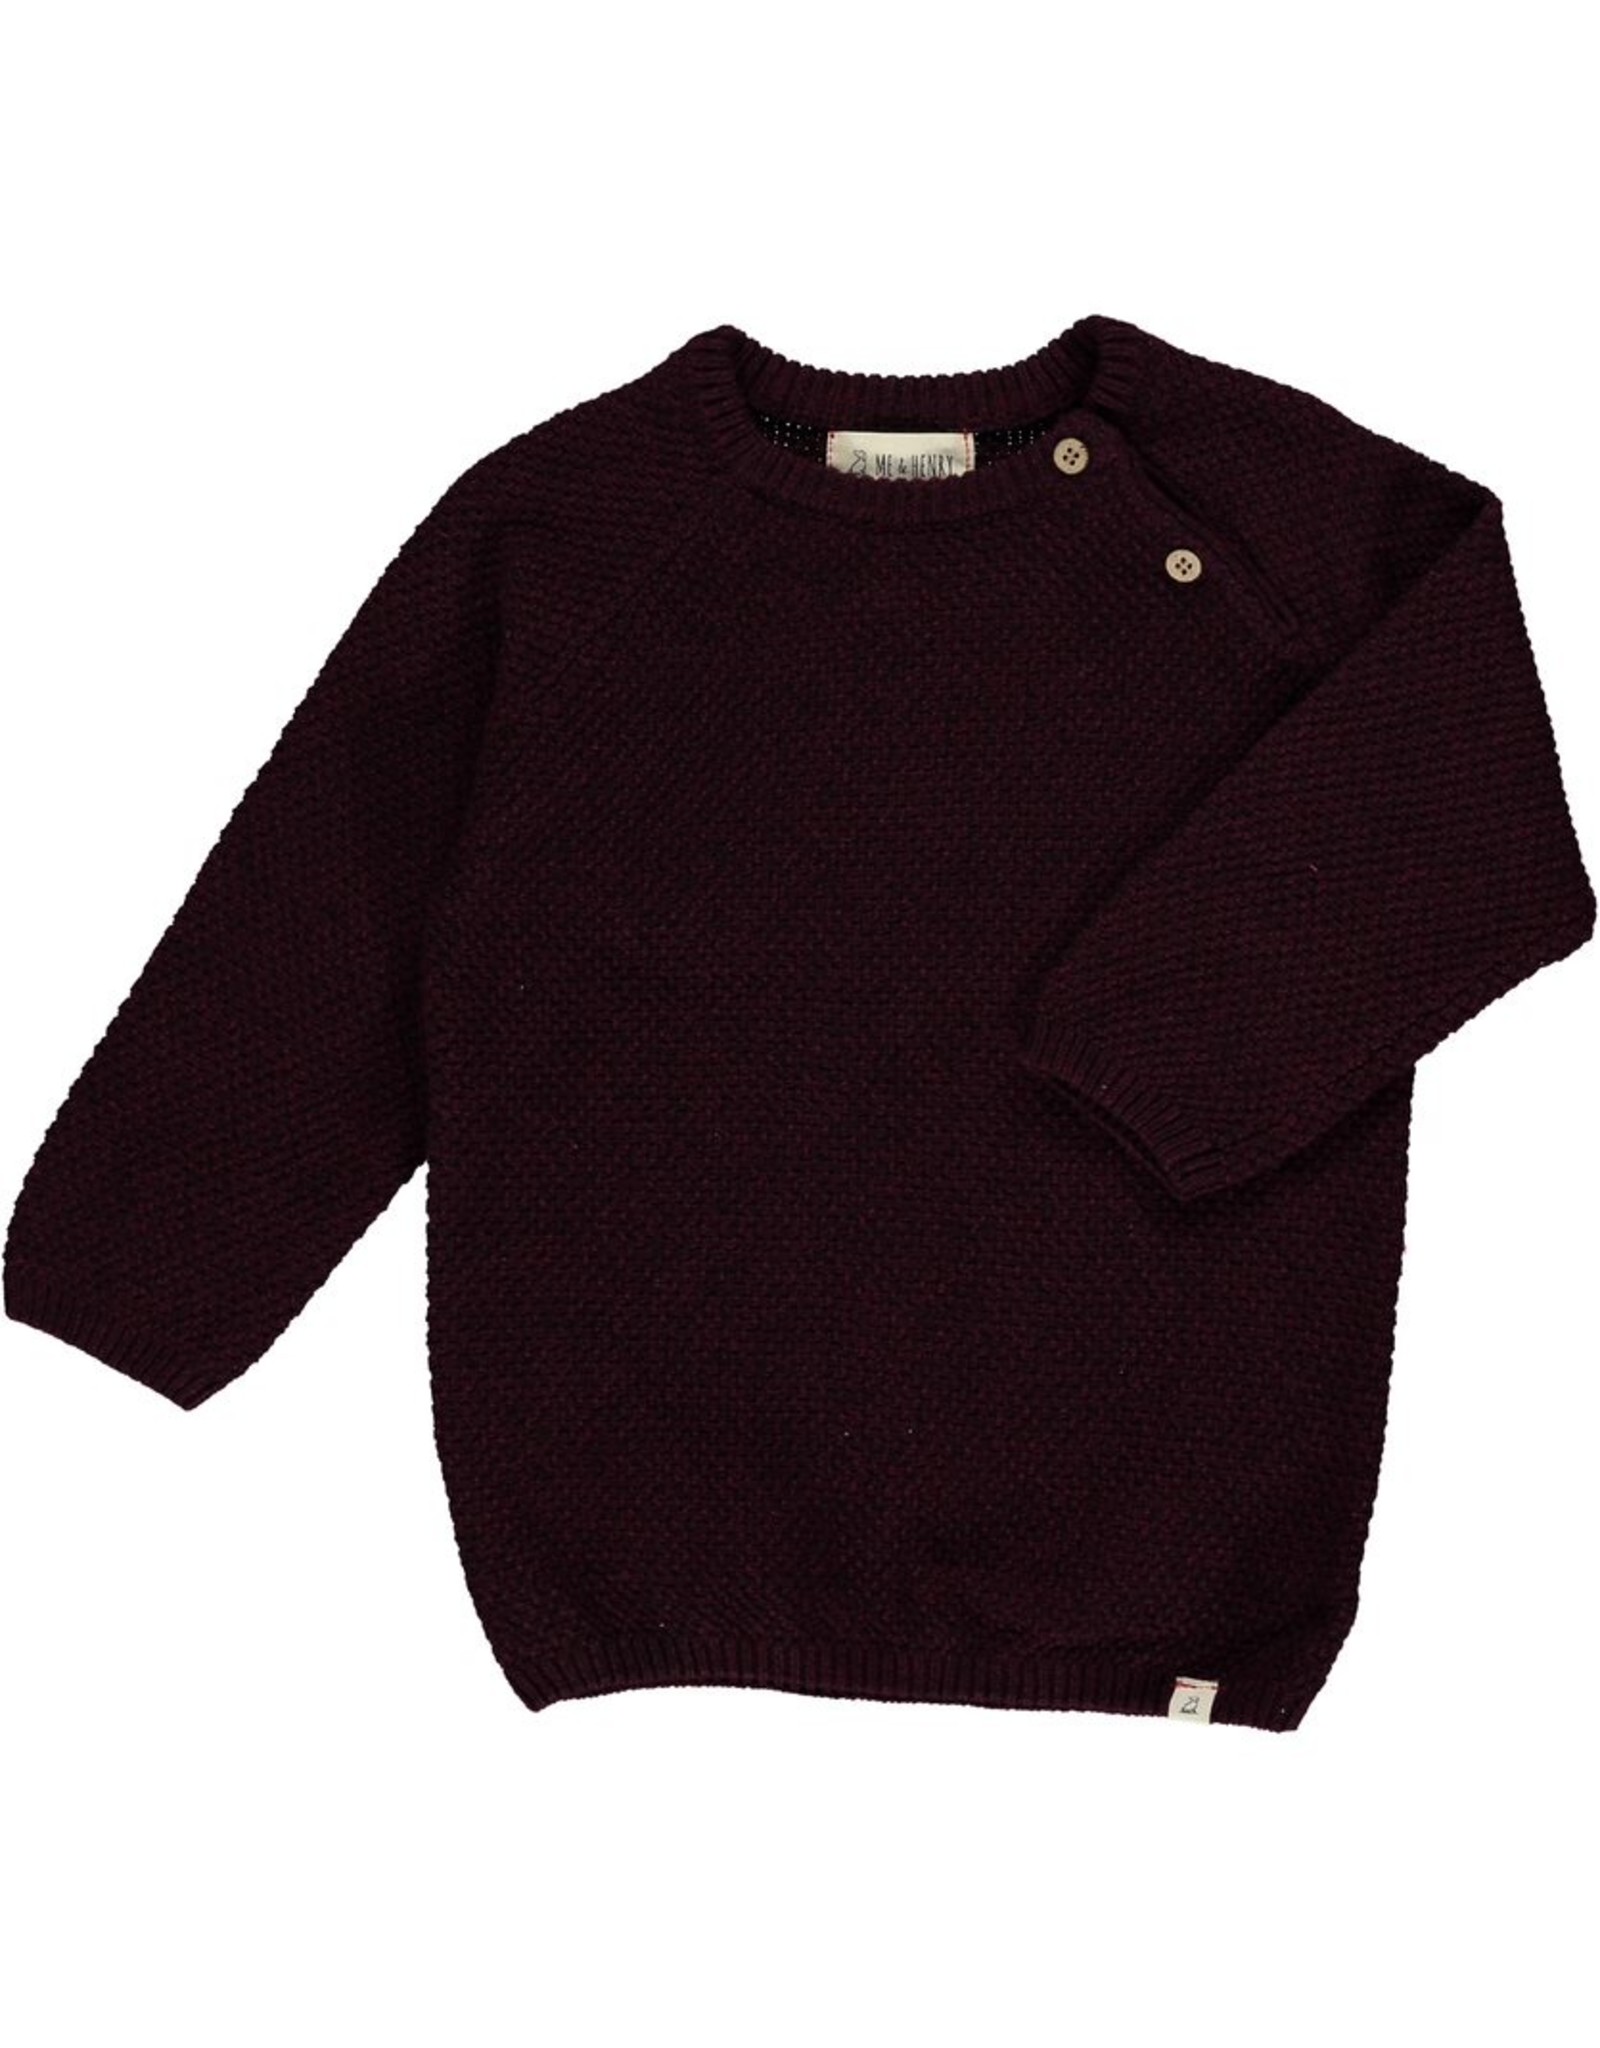 Me & Henry Roan Sweater Charcoal